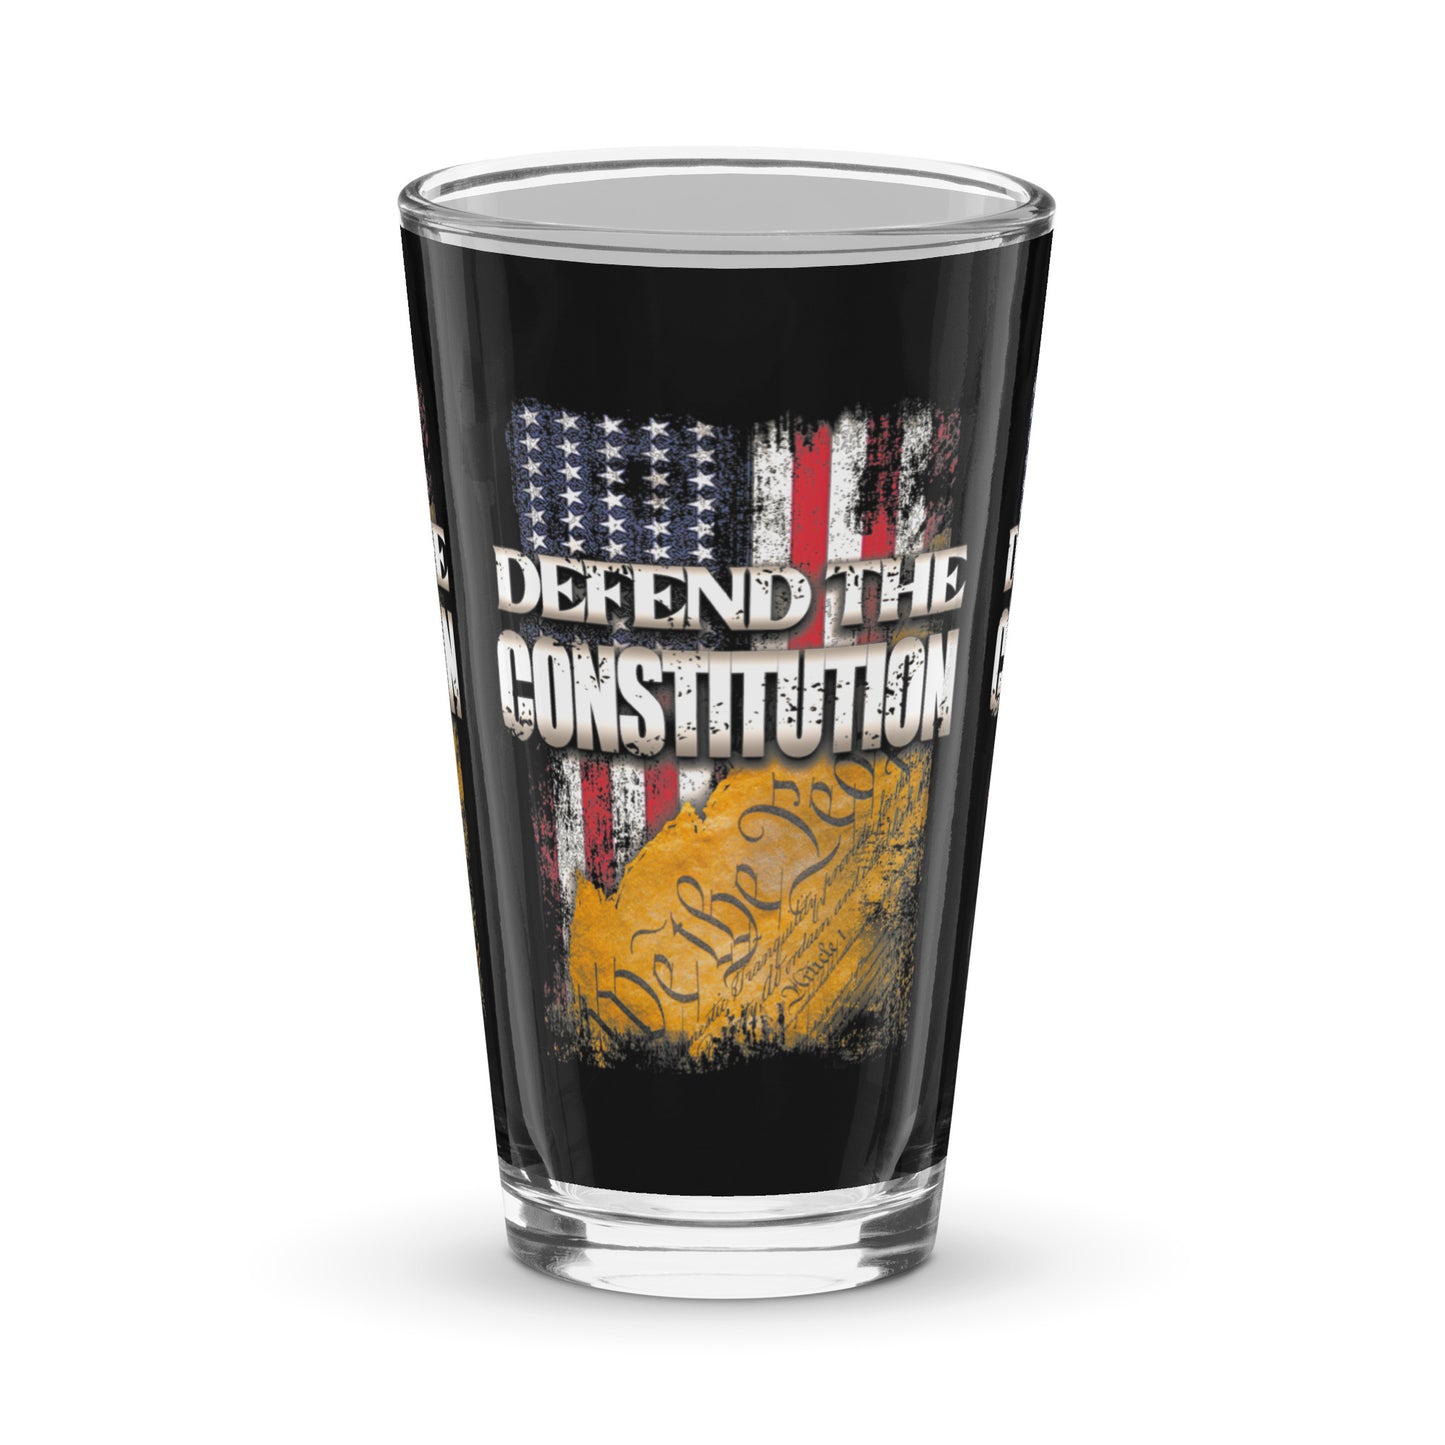 Defend The Constitution Shaker pint glass